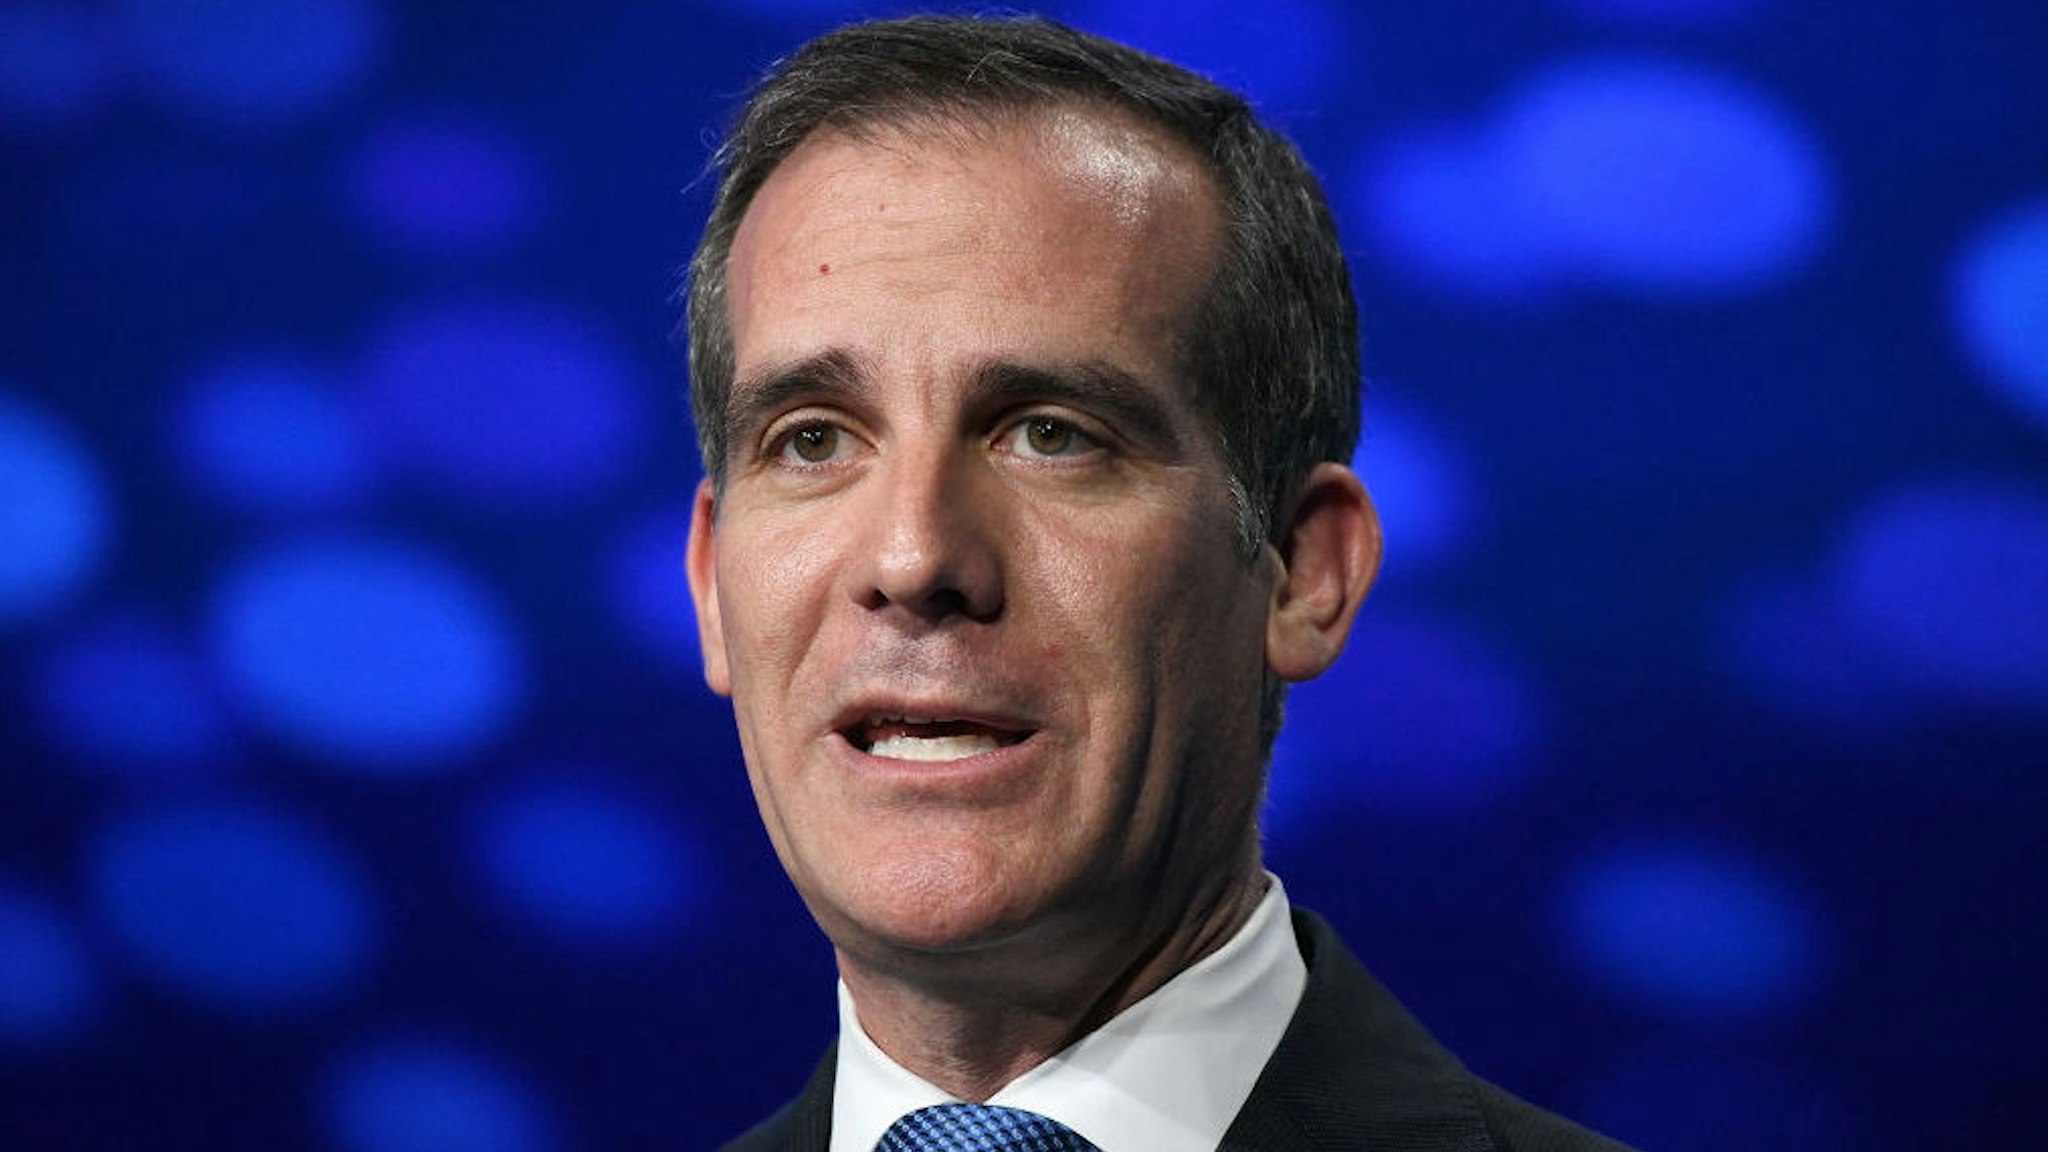 Eric Garcetti, Mayor of Los Angeles, presents onstage during the annual Milken Institute Global Conference at The Beverly Hilton Hotel on April 29, 2019 in Beverly Hills, California.